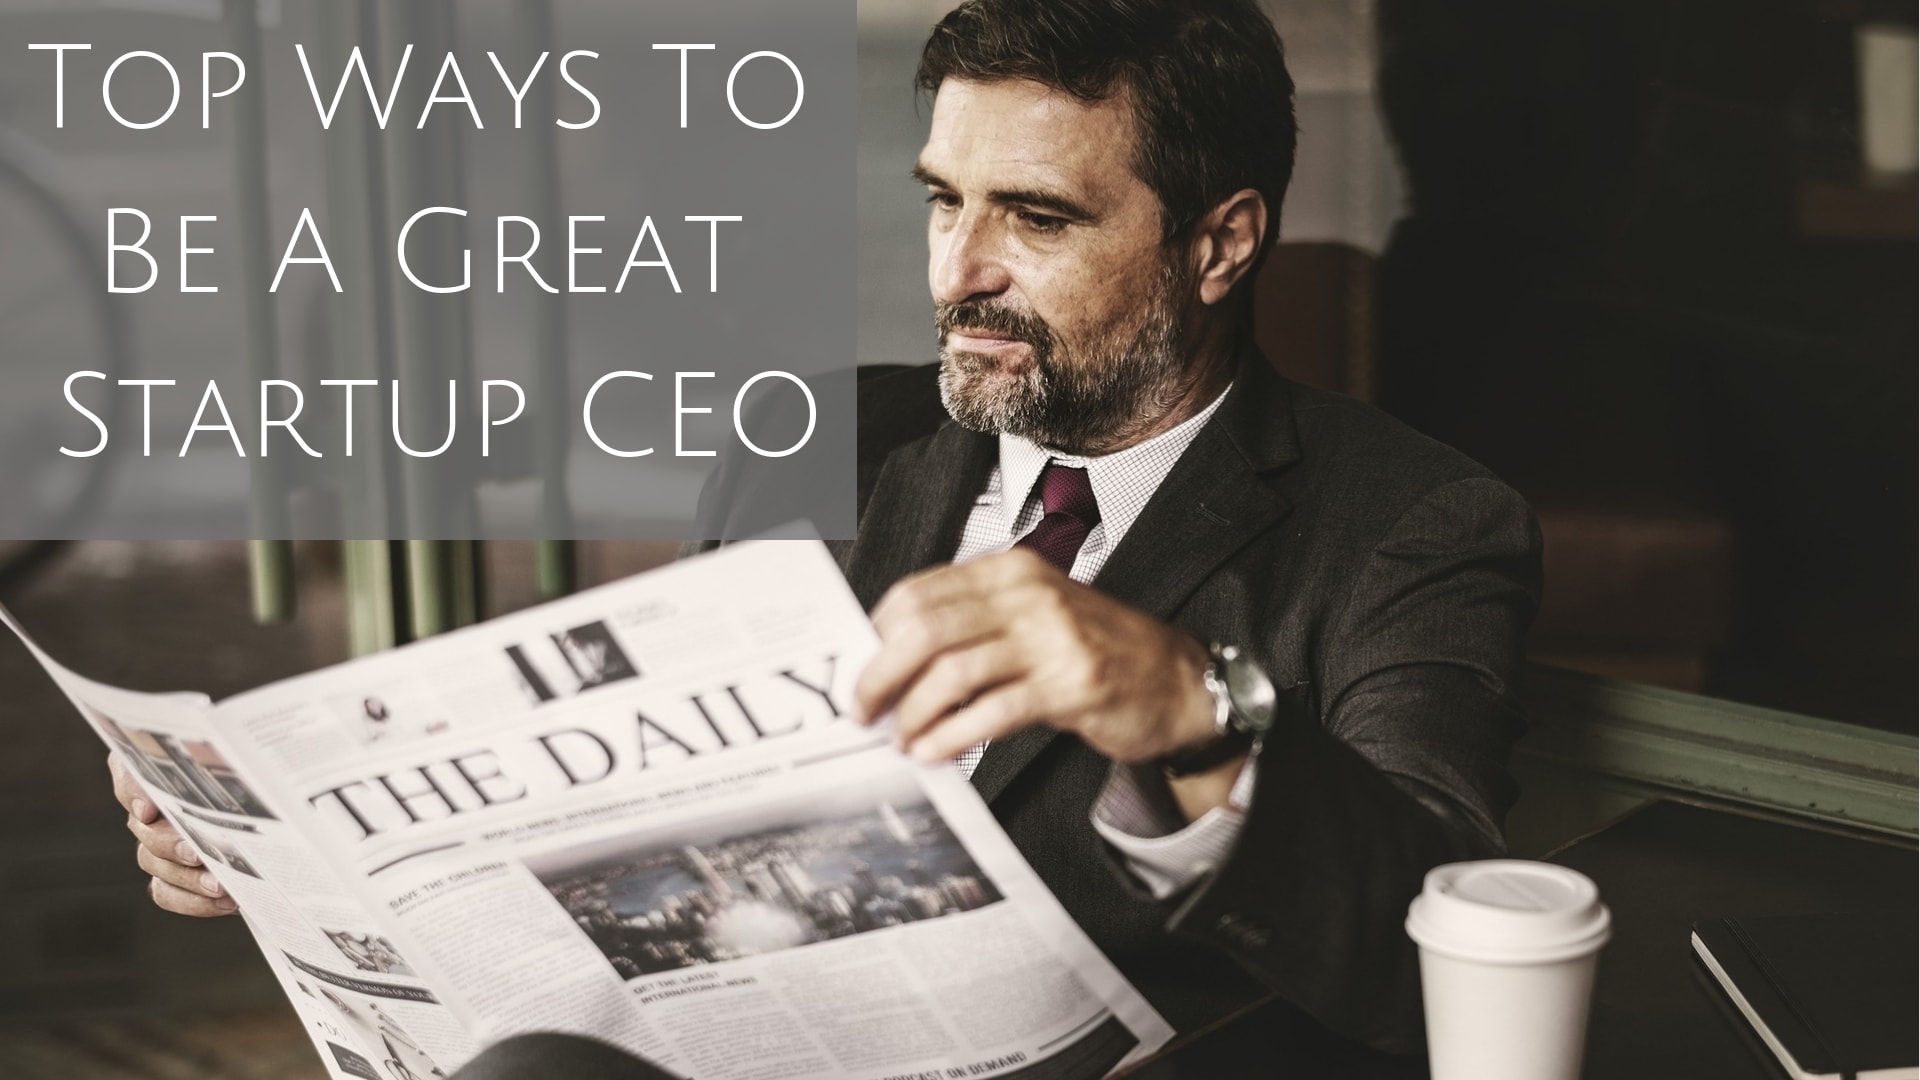 Top Ways To Be A Great Startup CEO